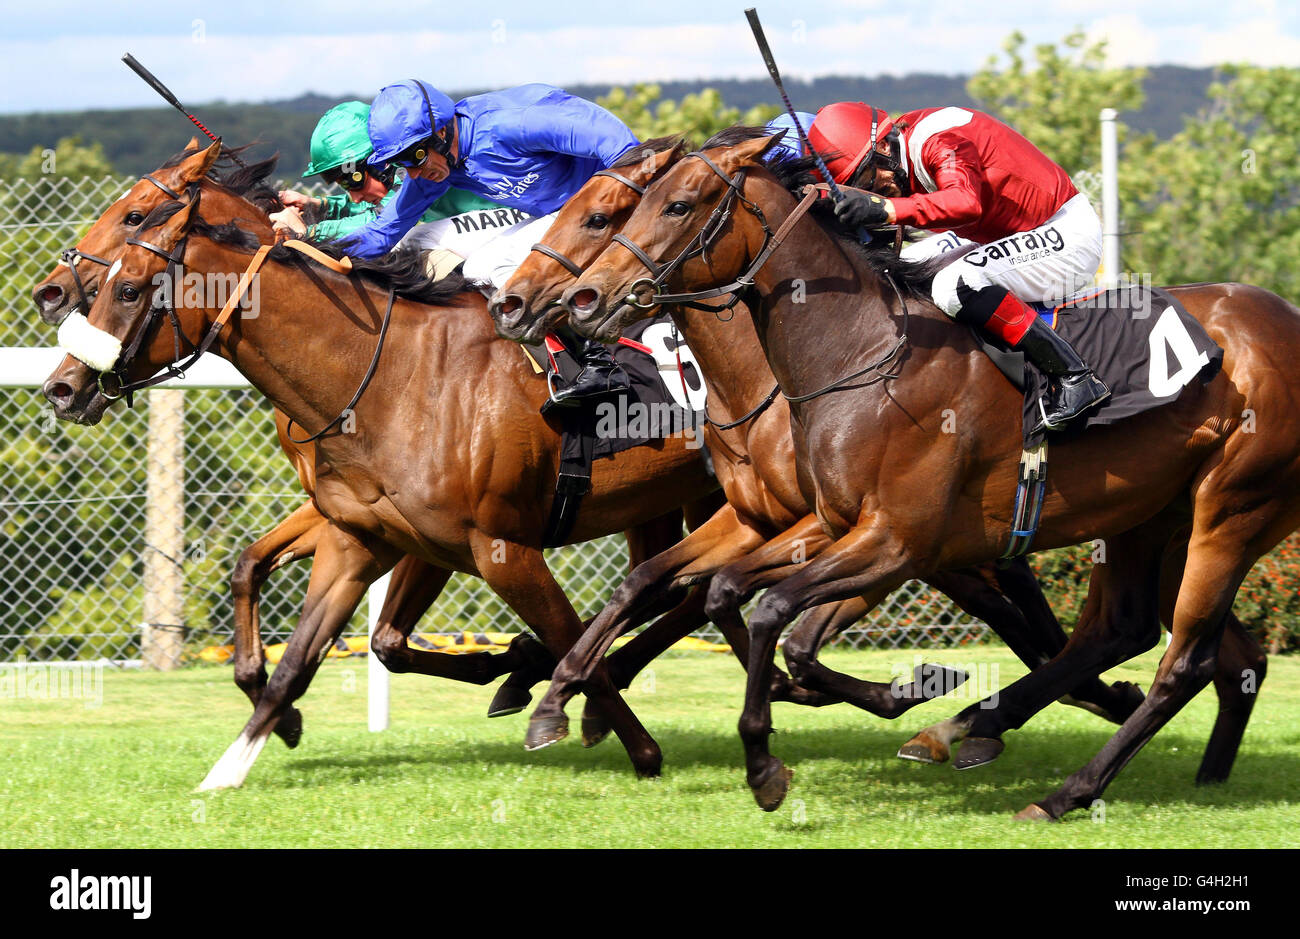 (left to right) Questing ridden by William Buick, Rakasa ridden by Frankie Dettori, Regal Realm ridden by Jimmy Fortune and Nayarra ridden by Kieron Fallon, race for a photo finish during The Whiteley Clinic Prestige Stakes at Goodwood Racecourse, Chichester. Stock Photo